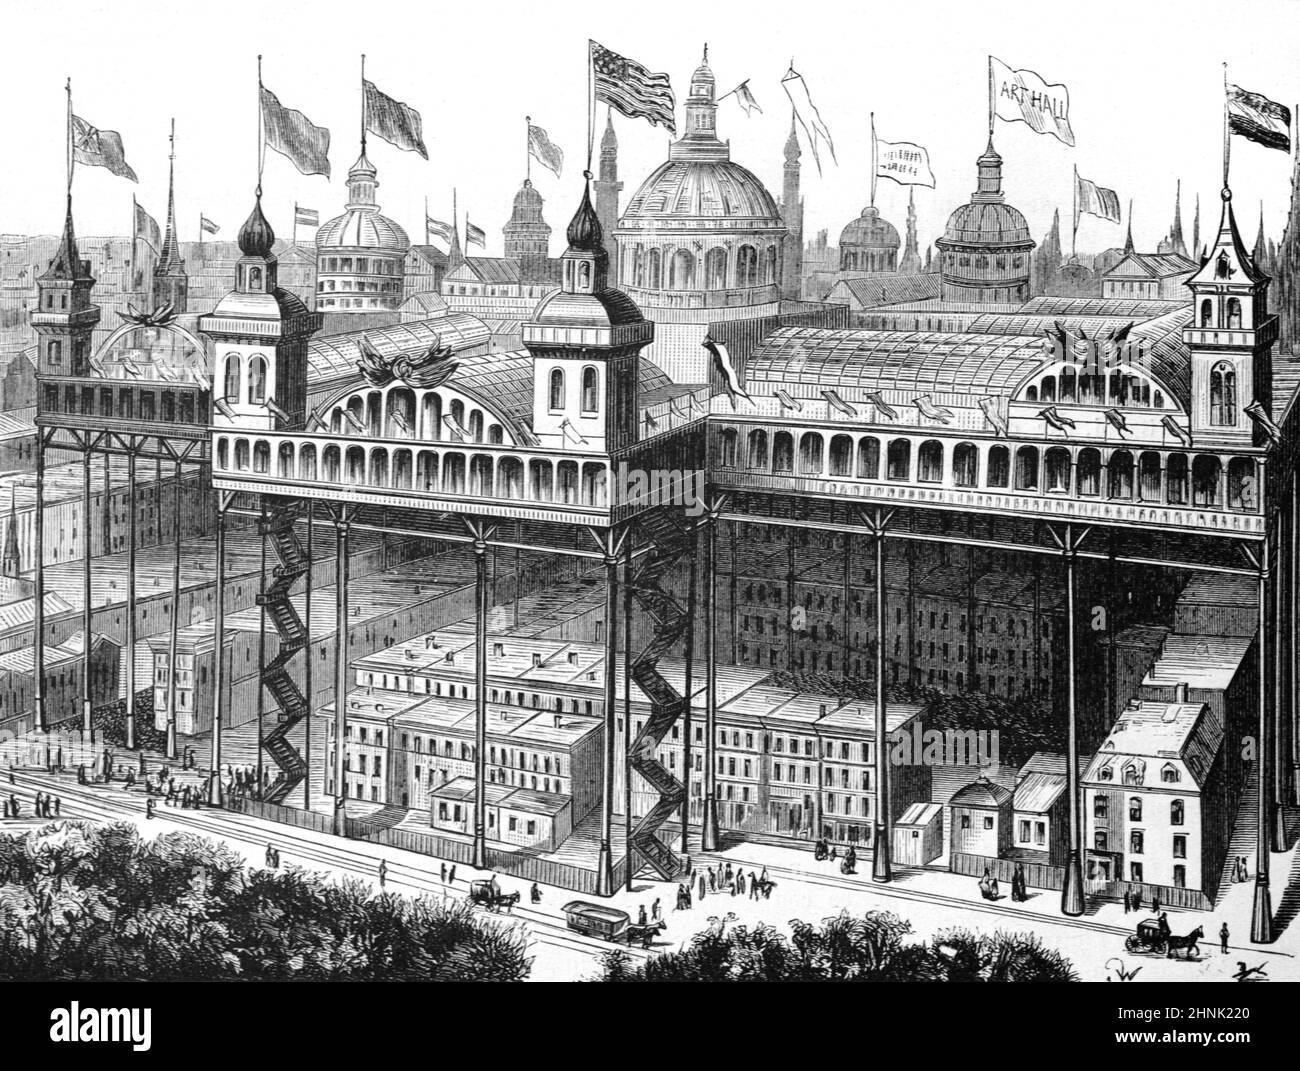 Futuristic Artist's Impression of an Aerial City, a proposal for a World Exhibition or World Fair Exhibition in the United States of America or USA . A new city raised up on a metal or steel framework is constructed above the historic town or city below. Vintage Illustation or Engraving 1883 Stock Photo